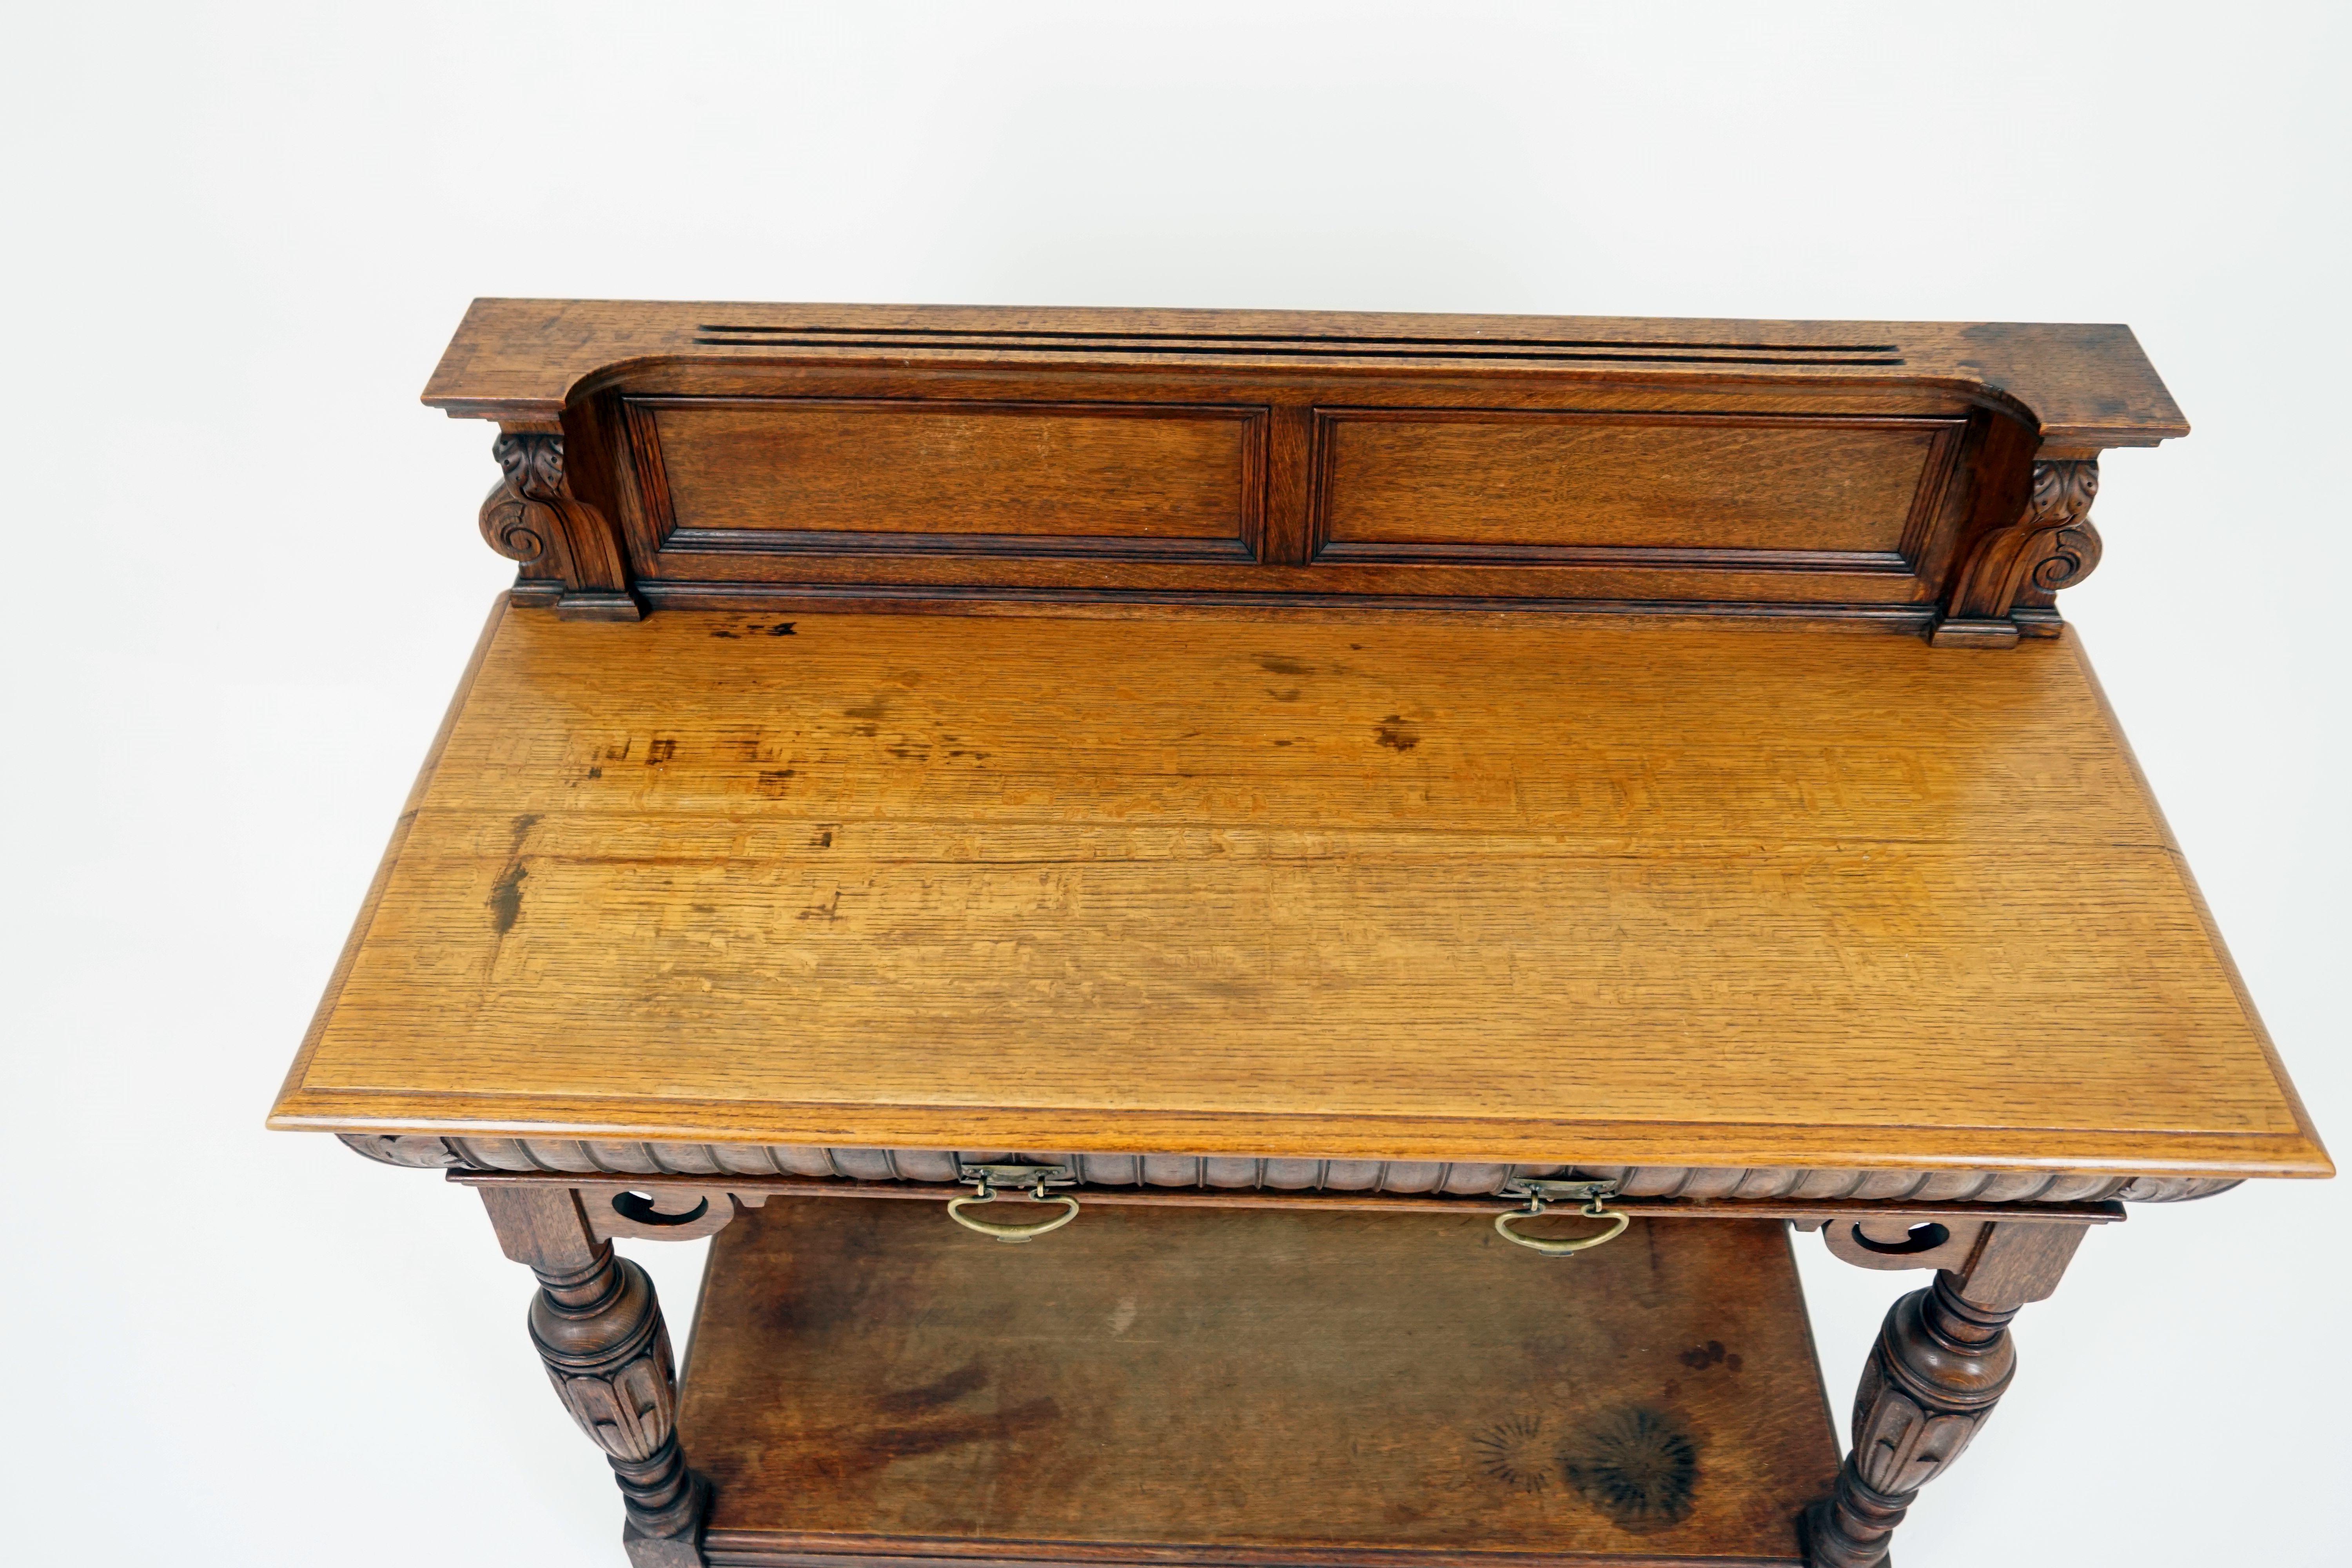 Antique serving table, Victorian carved tiger oak console table or hall table, antique furniture, Scotland, 1890

Scotland, 1890
Solid oak
Original finish
Carved panel back with plate rail on top
Rectangular top with moulded edge
Slant front